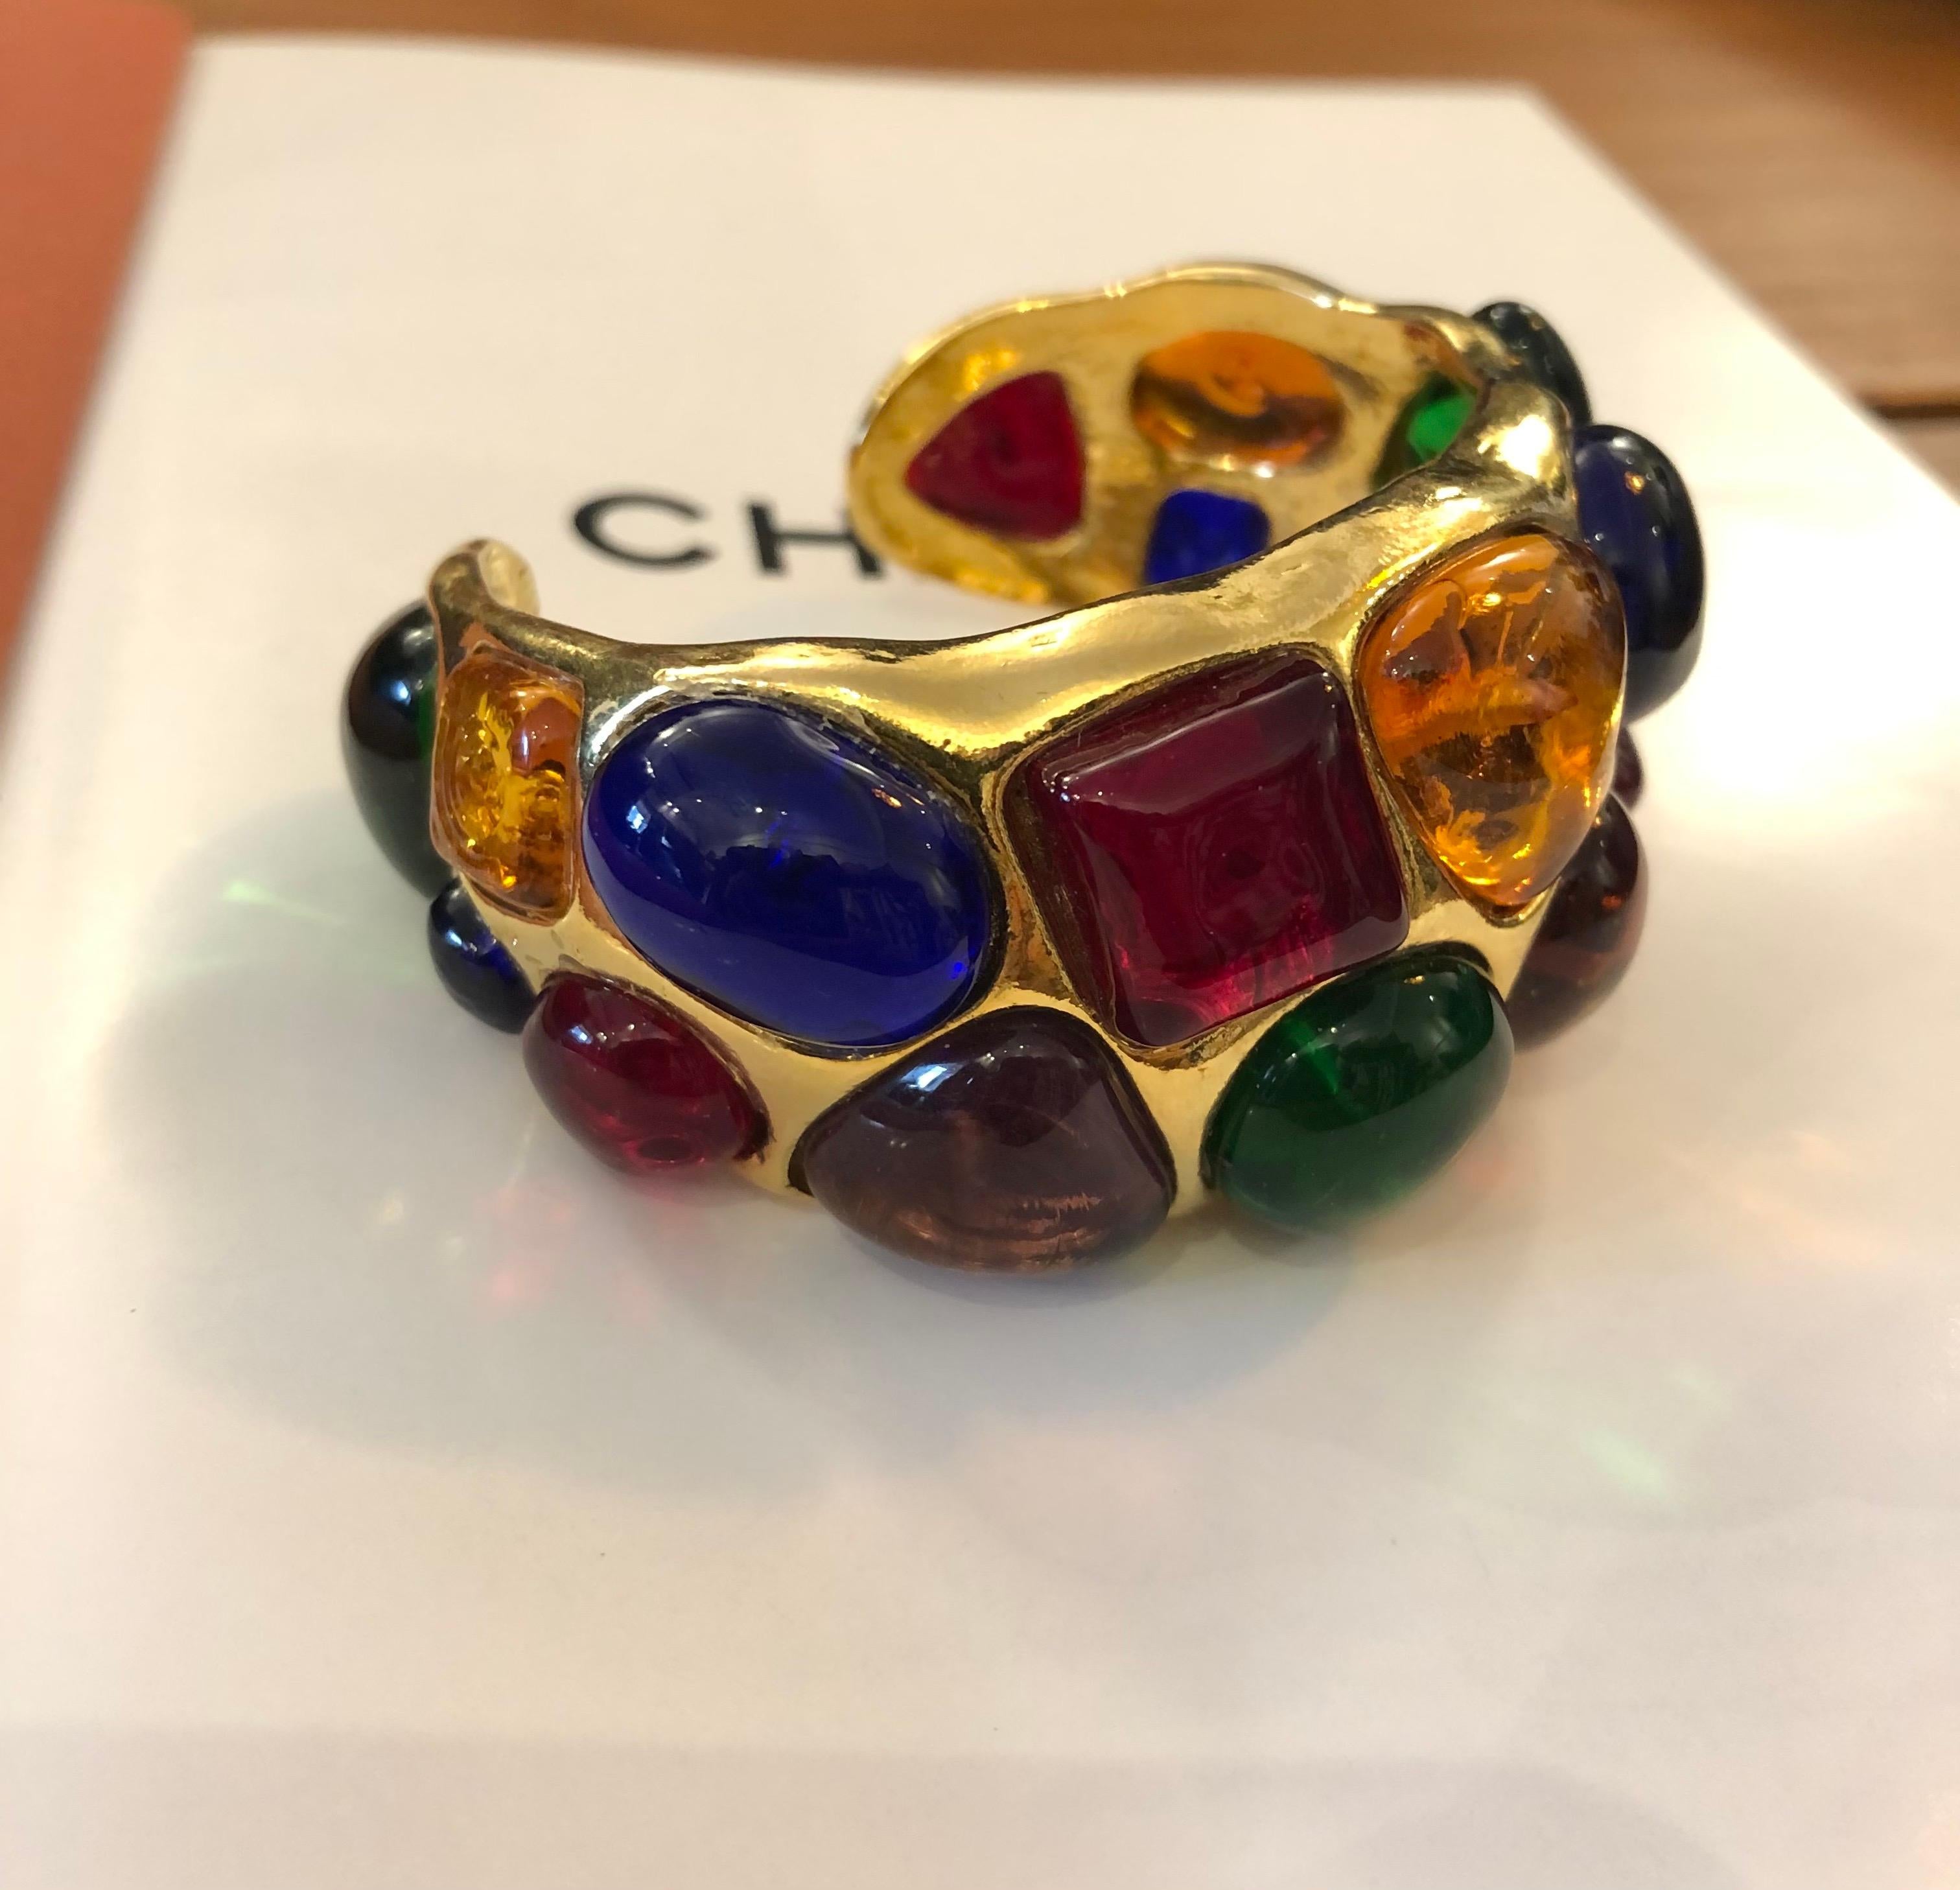 1980s Chanel gold toned cuff bangle adorned with 17 multicolored Gripoix. Stamped 26 made in France. Circumference measures approximately 16 cm Width 3.3 cm Opening 1.6 cm. Comes with dust bag and box.

Condition: Minor signs of wear. Generally in